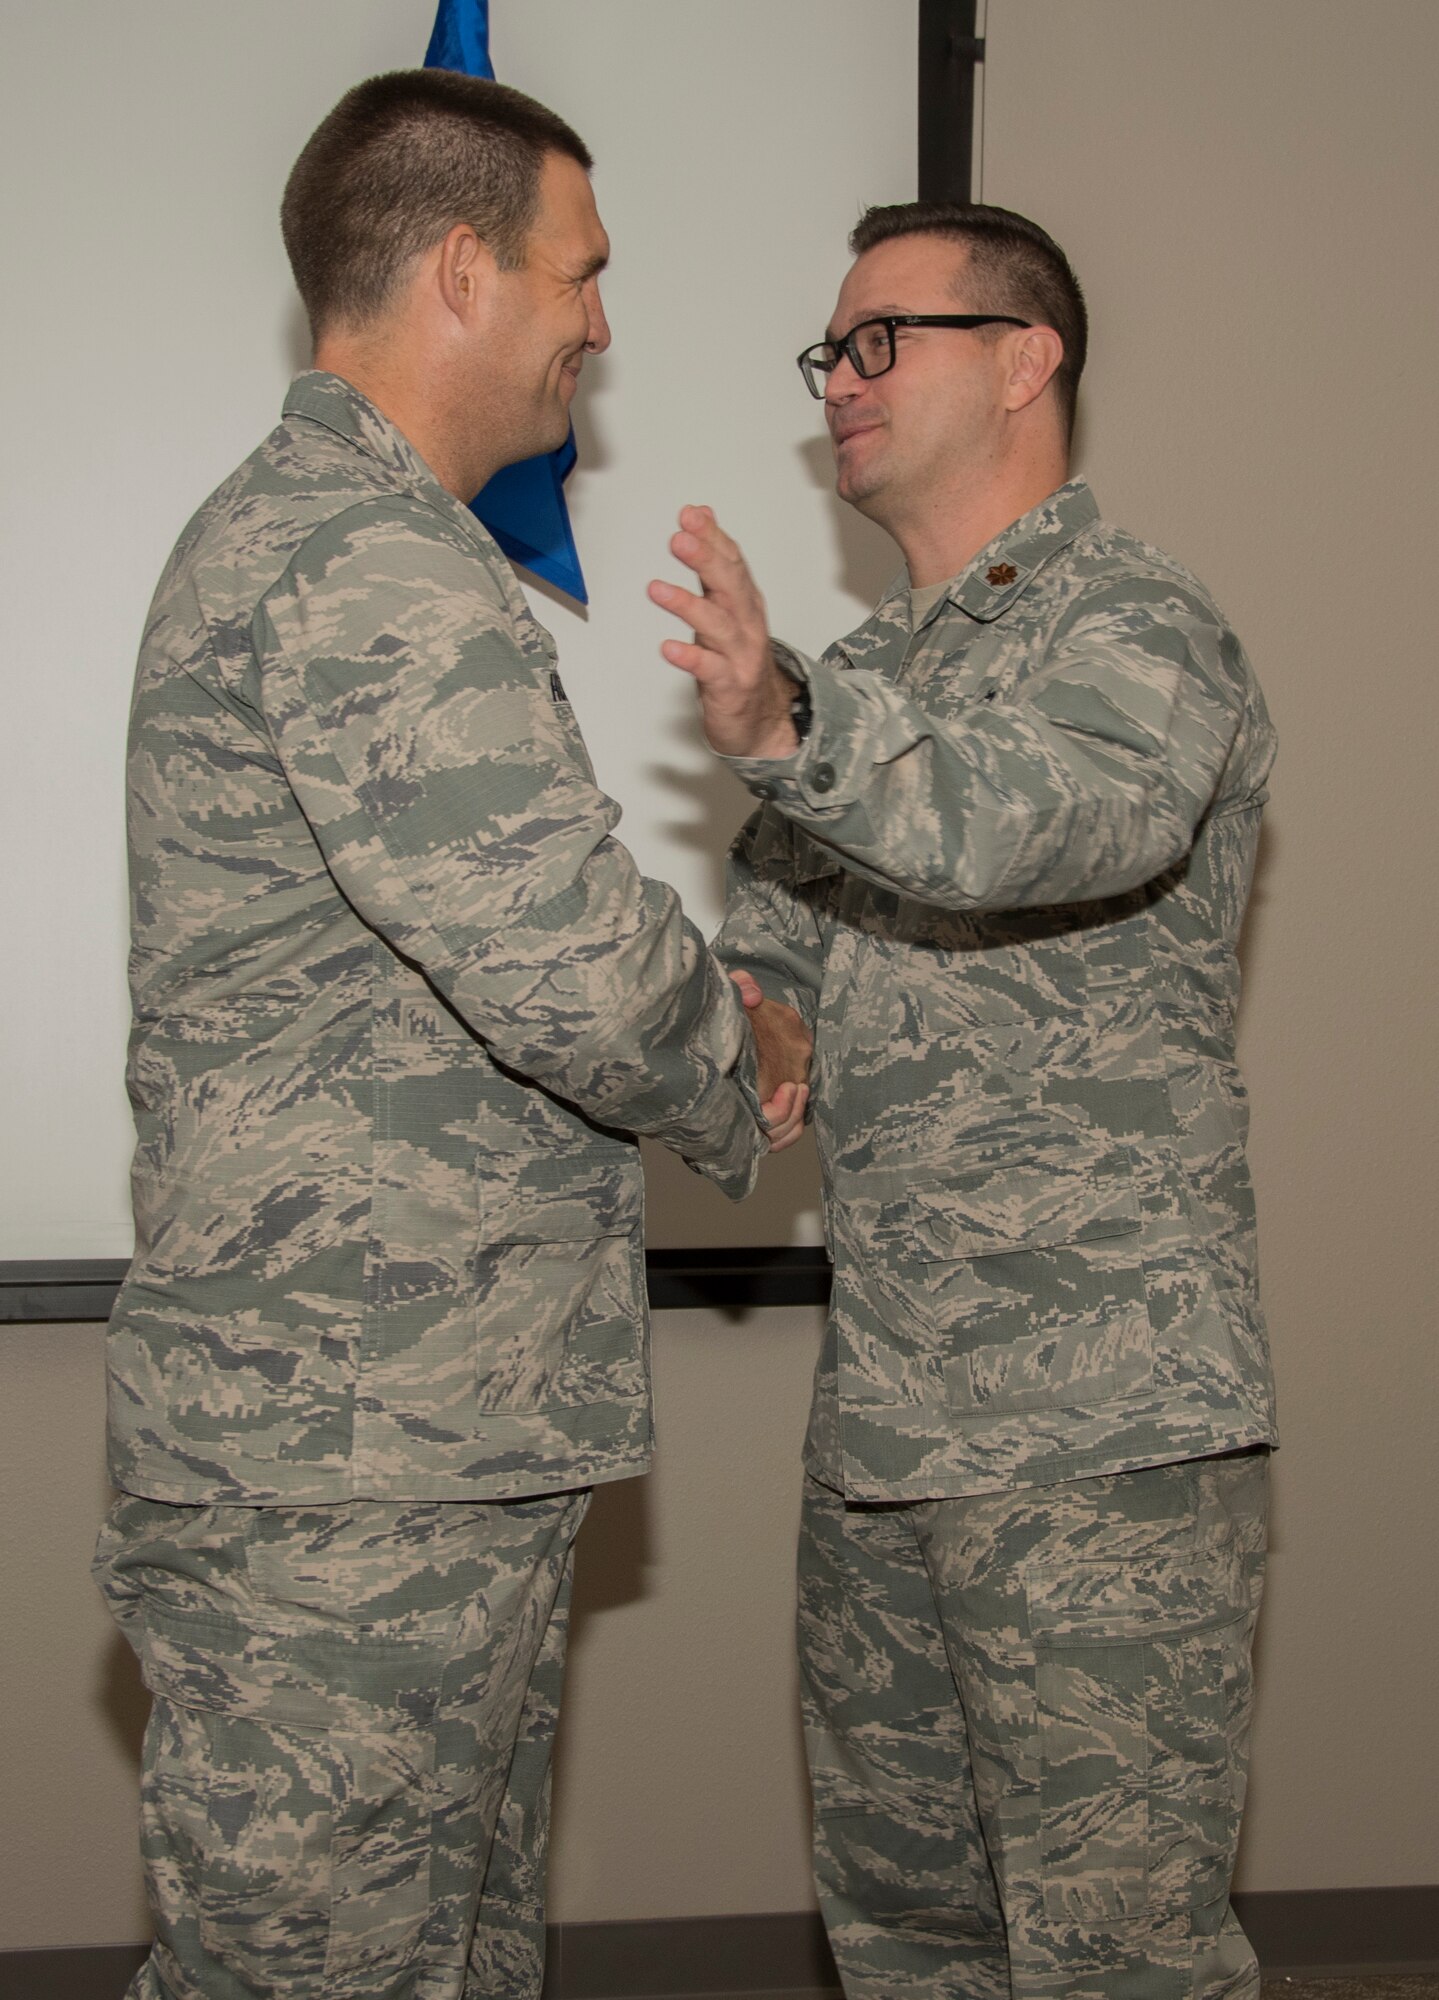 U.S. Air Force Maj. Charles Delongchamp relinquished command of the 307th Logistics Readiness Squadron to Maj. David Hubbard in a ceremony at Barksdale Air Force Base, Louisiana, Sept. 9, 2018. (U.S. Air Force photo by Airman 1st Class Maxwell Daigle/Released)